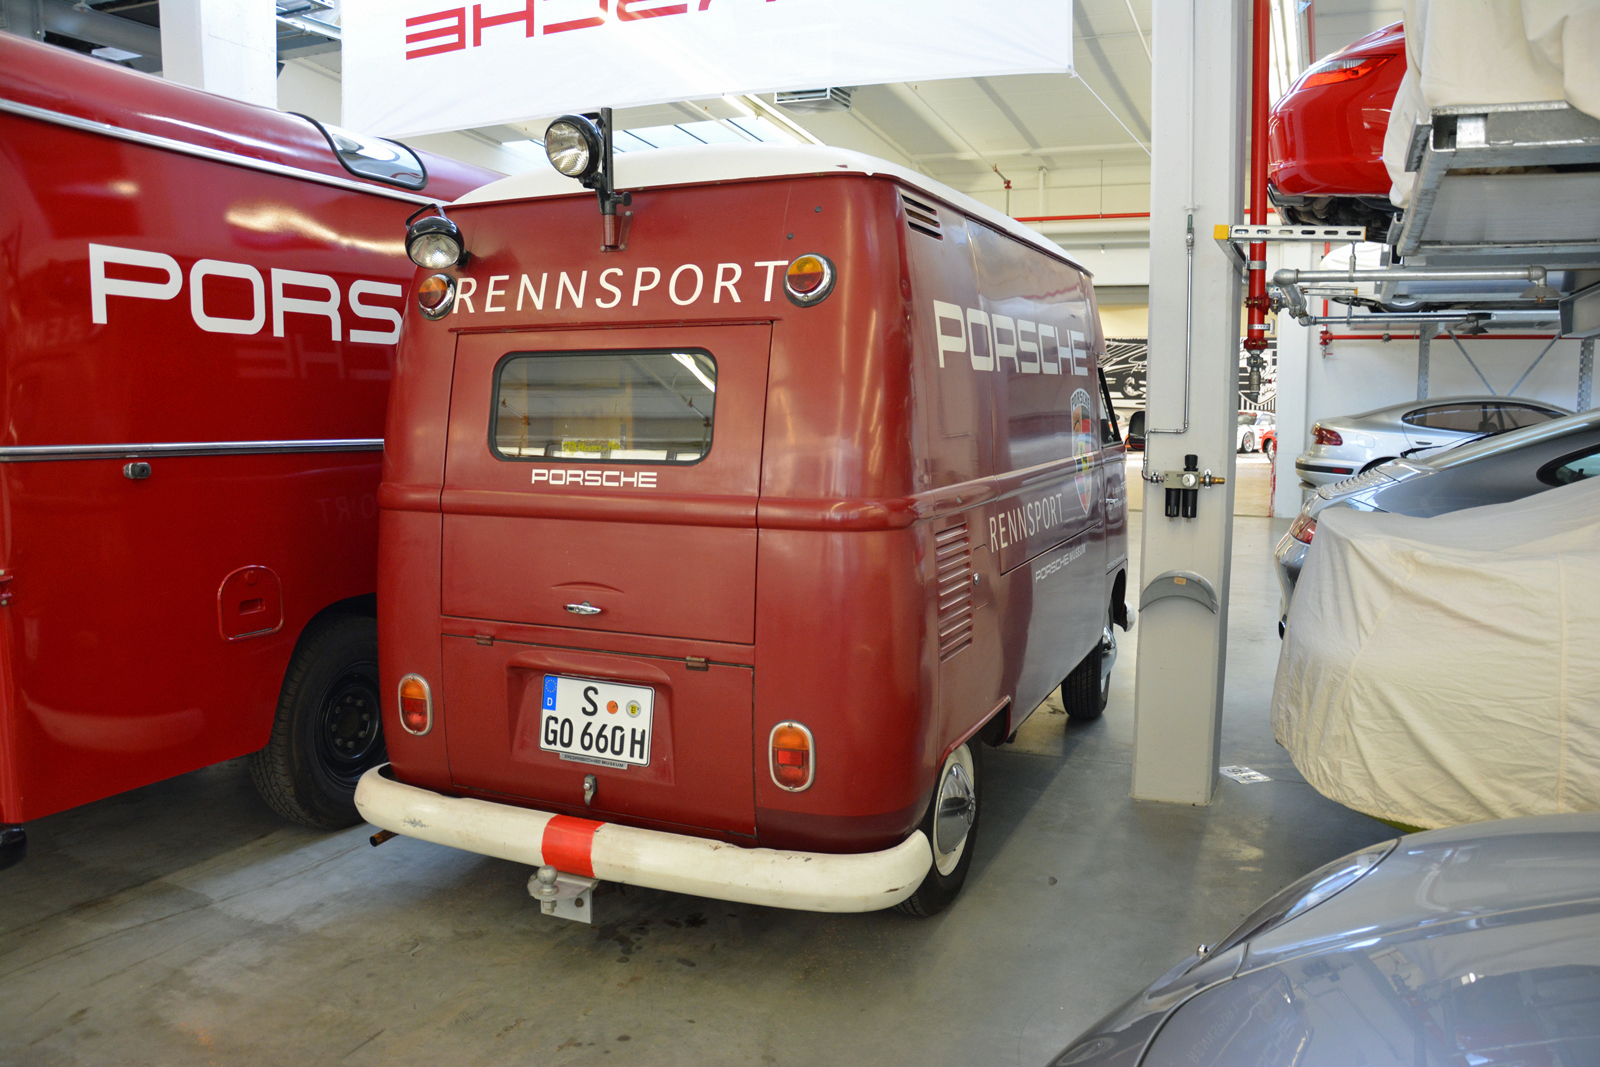 <p>Porsche has never dabbled in commercial vans, so it sourced its race support vehicles from other manufacturers. The original Volkswagen Bus was a popular option because it was solid, affordable and relatively <strong>cheap to operate</strong>. Porsche raised this example’s roof to carry more gear, creating a body style never offered by Volkswagen.</p>